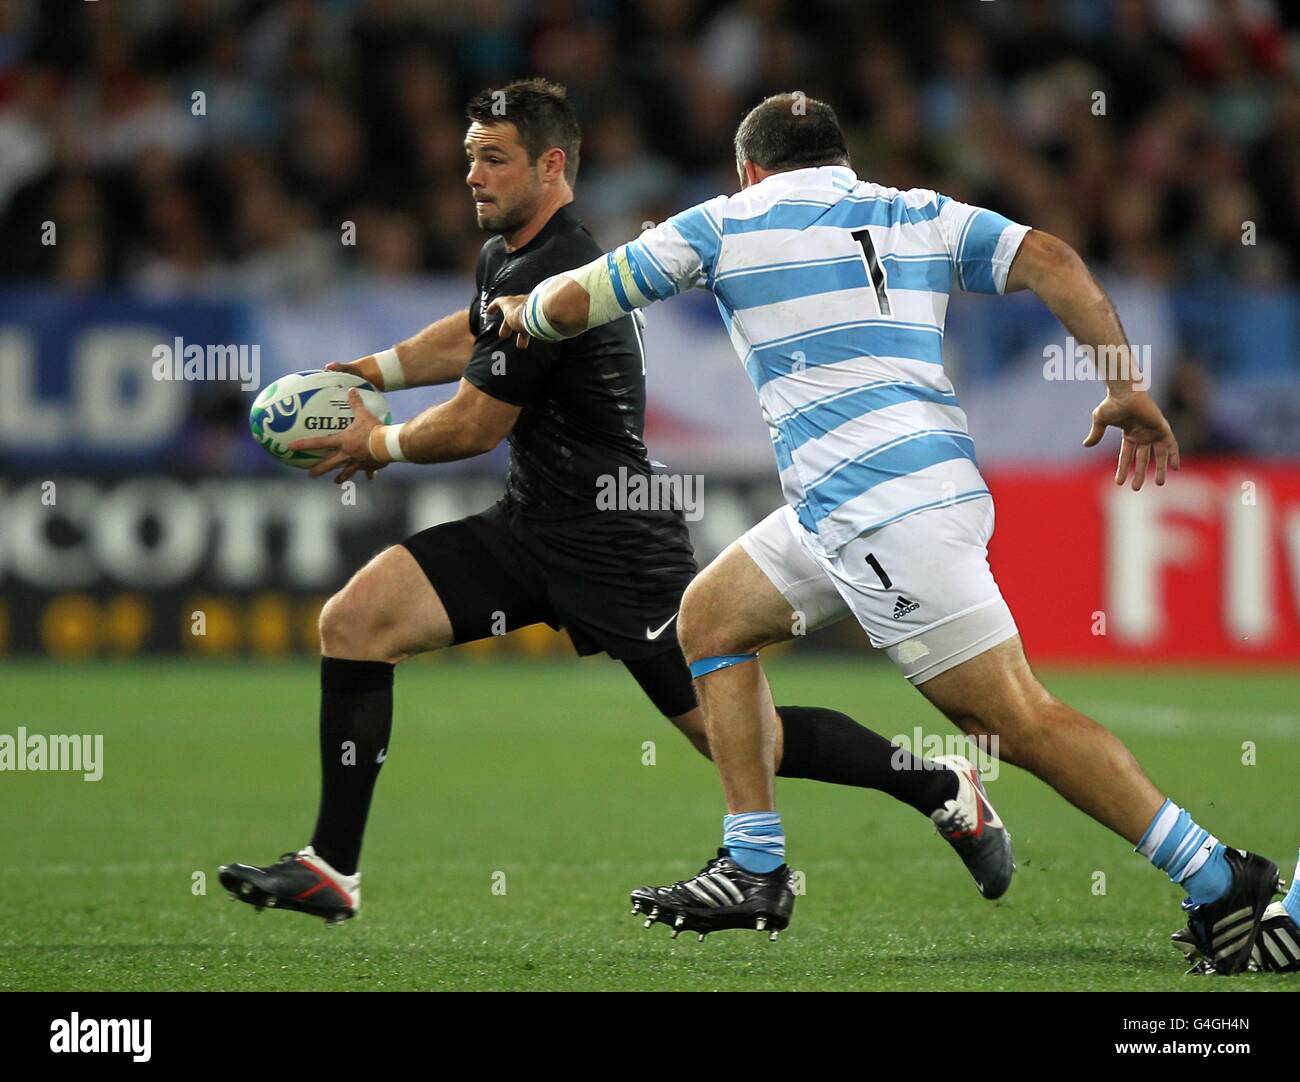 Rugby Union - IRB Rugby World Cup 2011 - Pool B - Argentina v England -  Otago Stadium. England's Ben Foden (left) attempts to get away from  Argentina's Rodrigo Roncero Stock Photo - Alamy